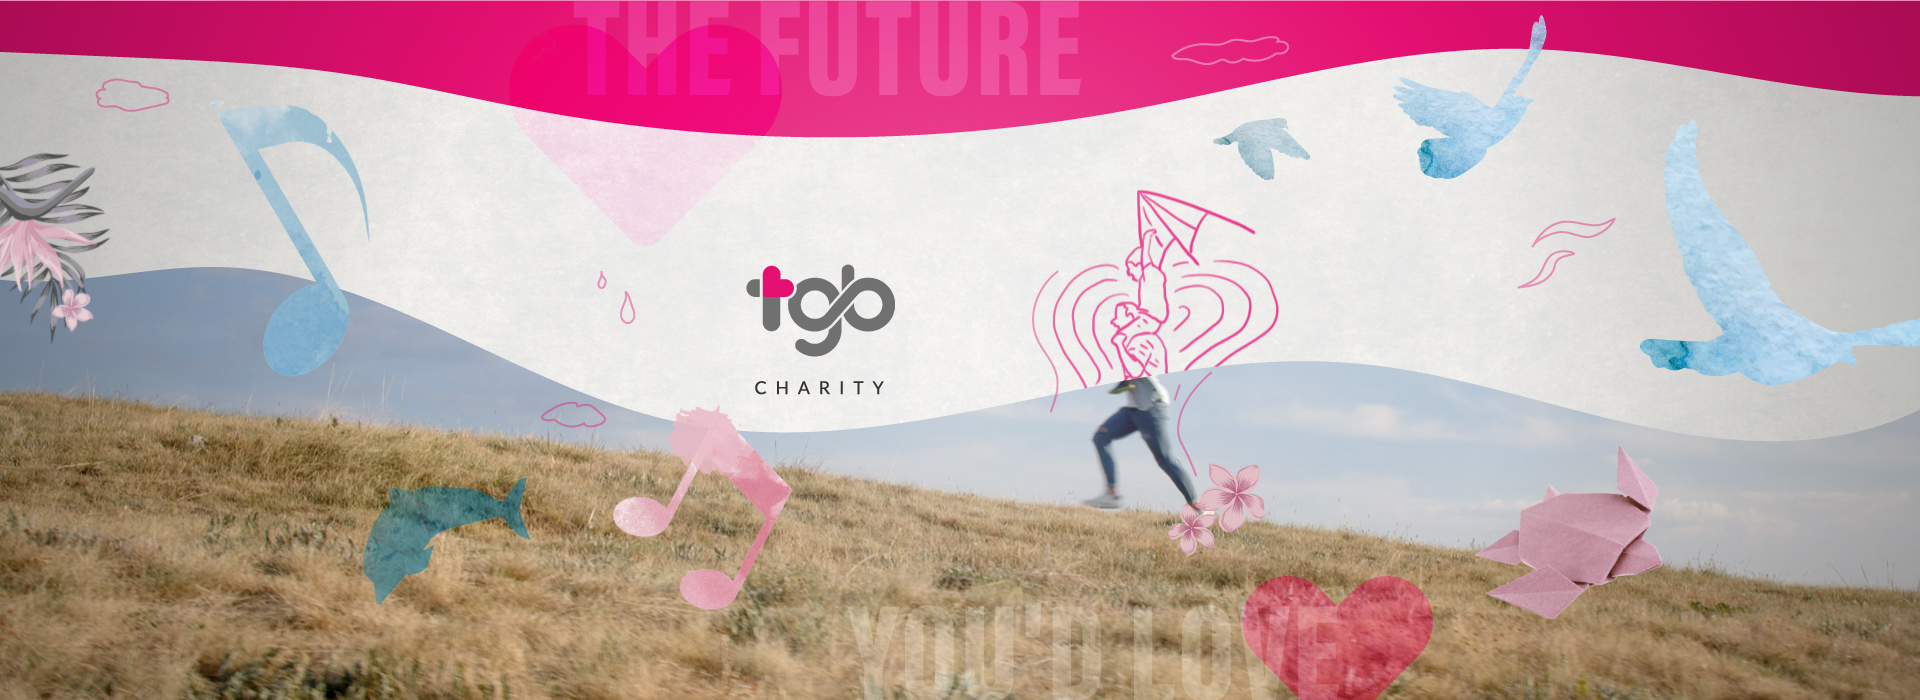 TGB Charity - Watch this 1 min video and get to know what kind of future people want!